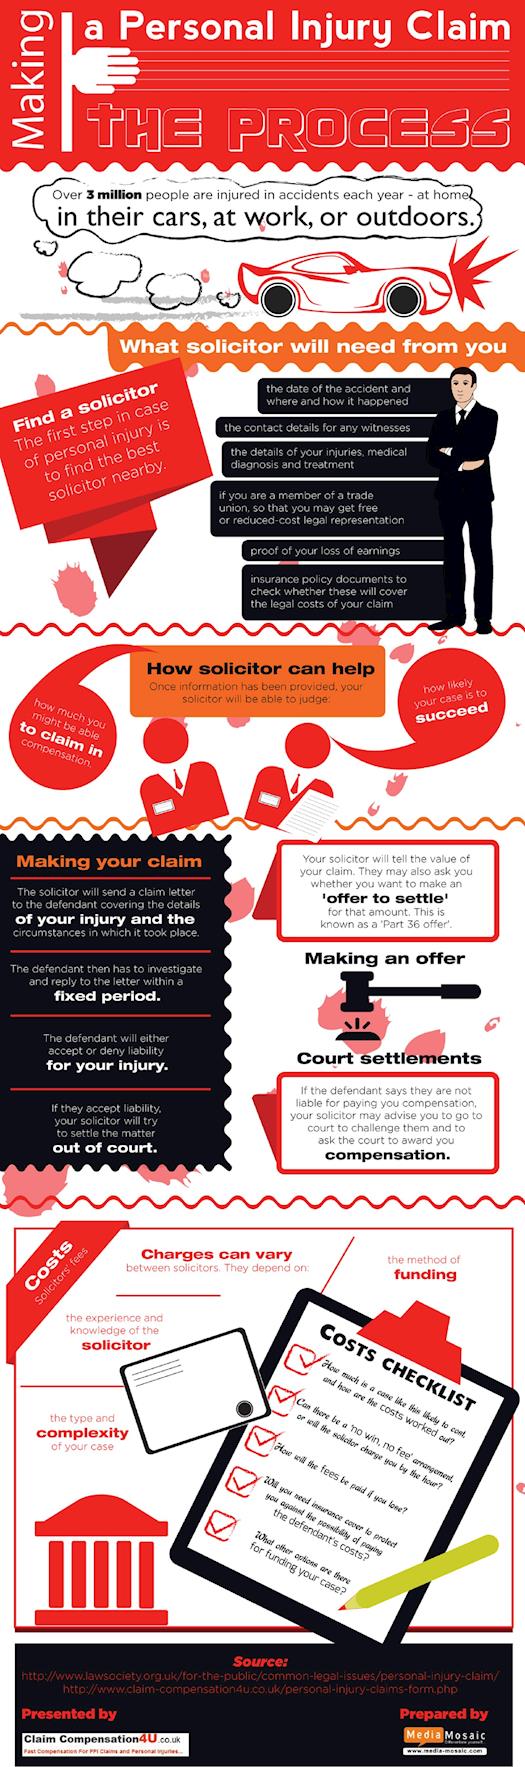 Making a Personal Injury Claim : The Process [Info Graphic]